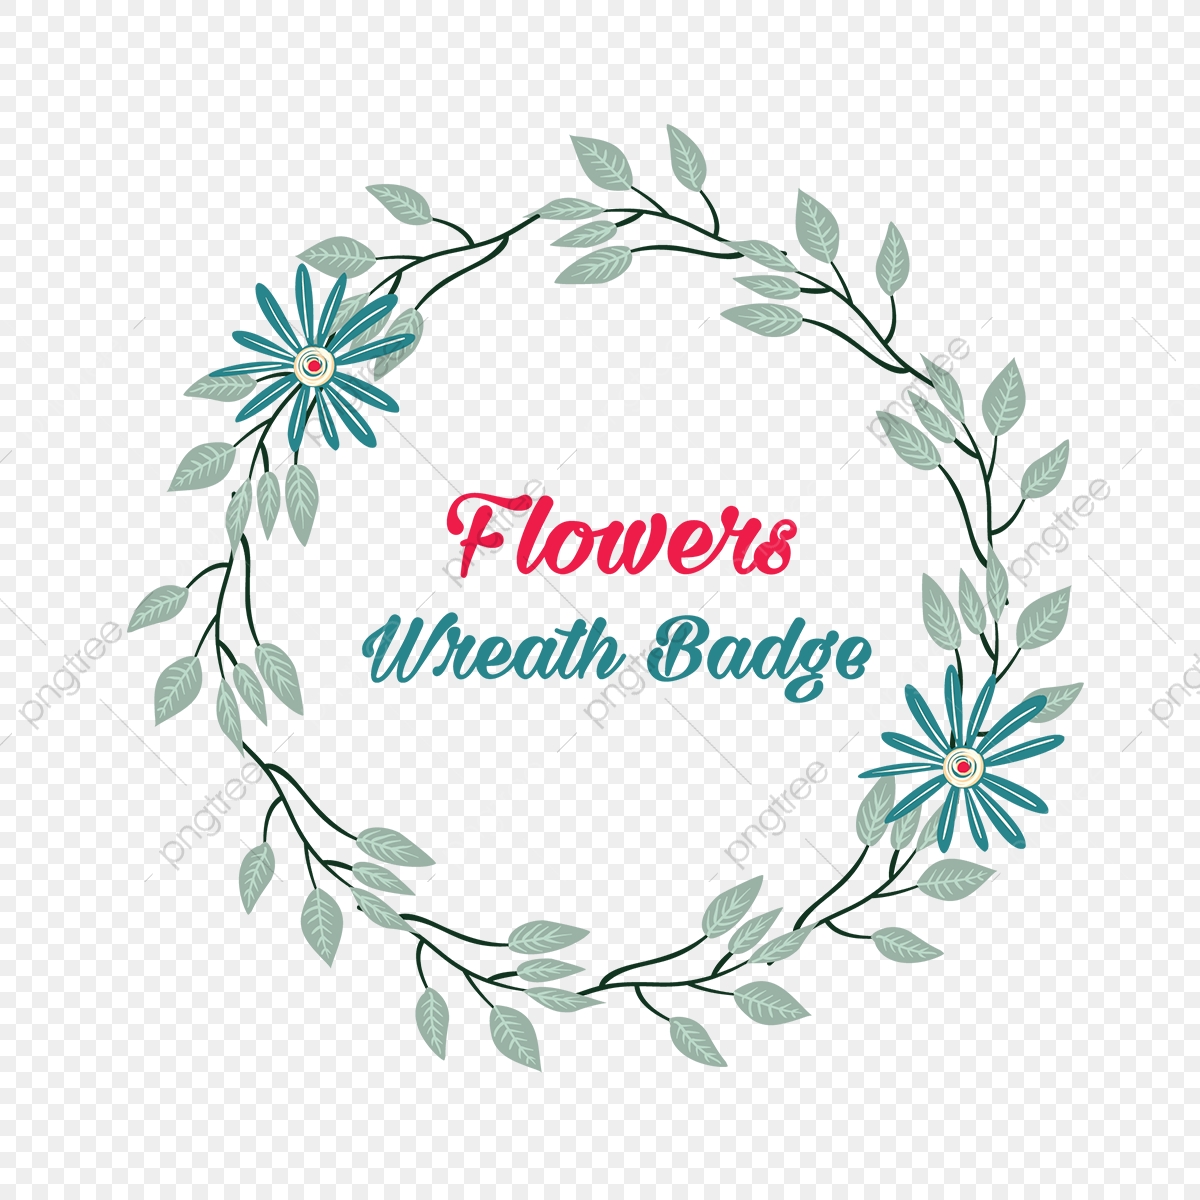 Cute Floral Flowers Wreath, Floral Flowers, Wreaths, Labels PNG and.